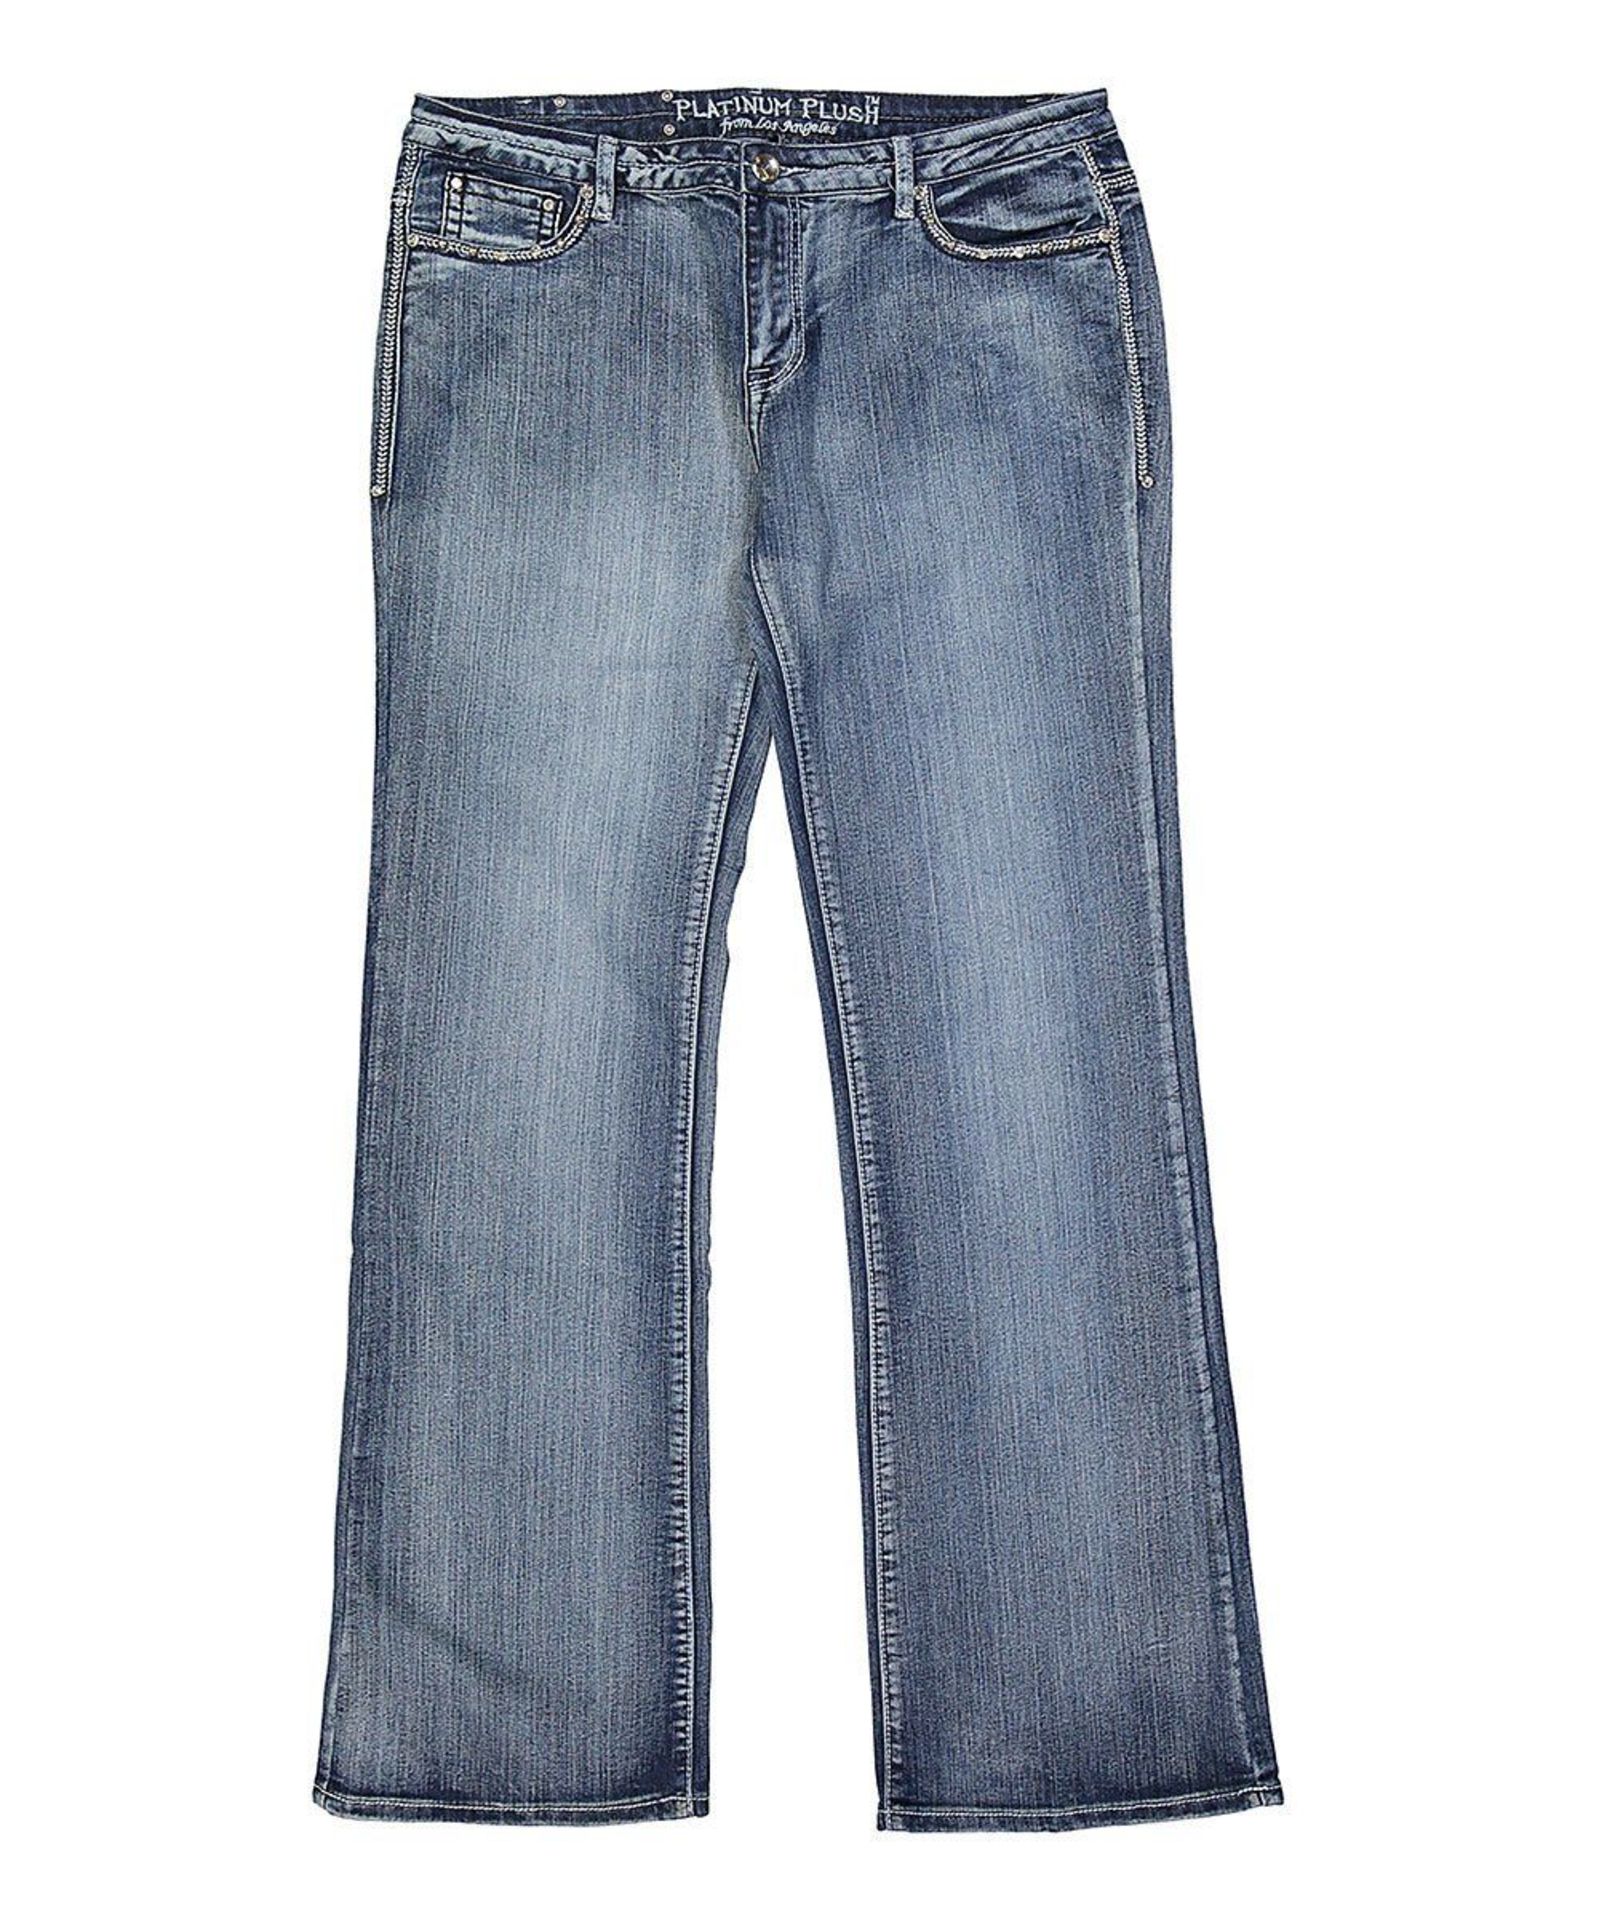 Bus Stop Denim Embroidered Pocket Jeans -Plus (Size 19) (New with tags) [Ref: 41573590- T-55]